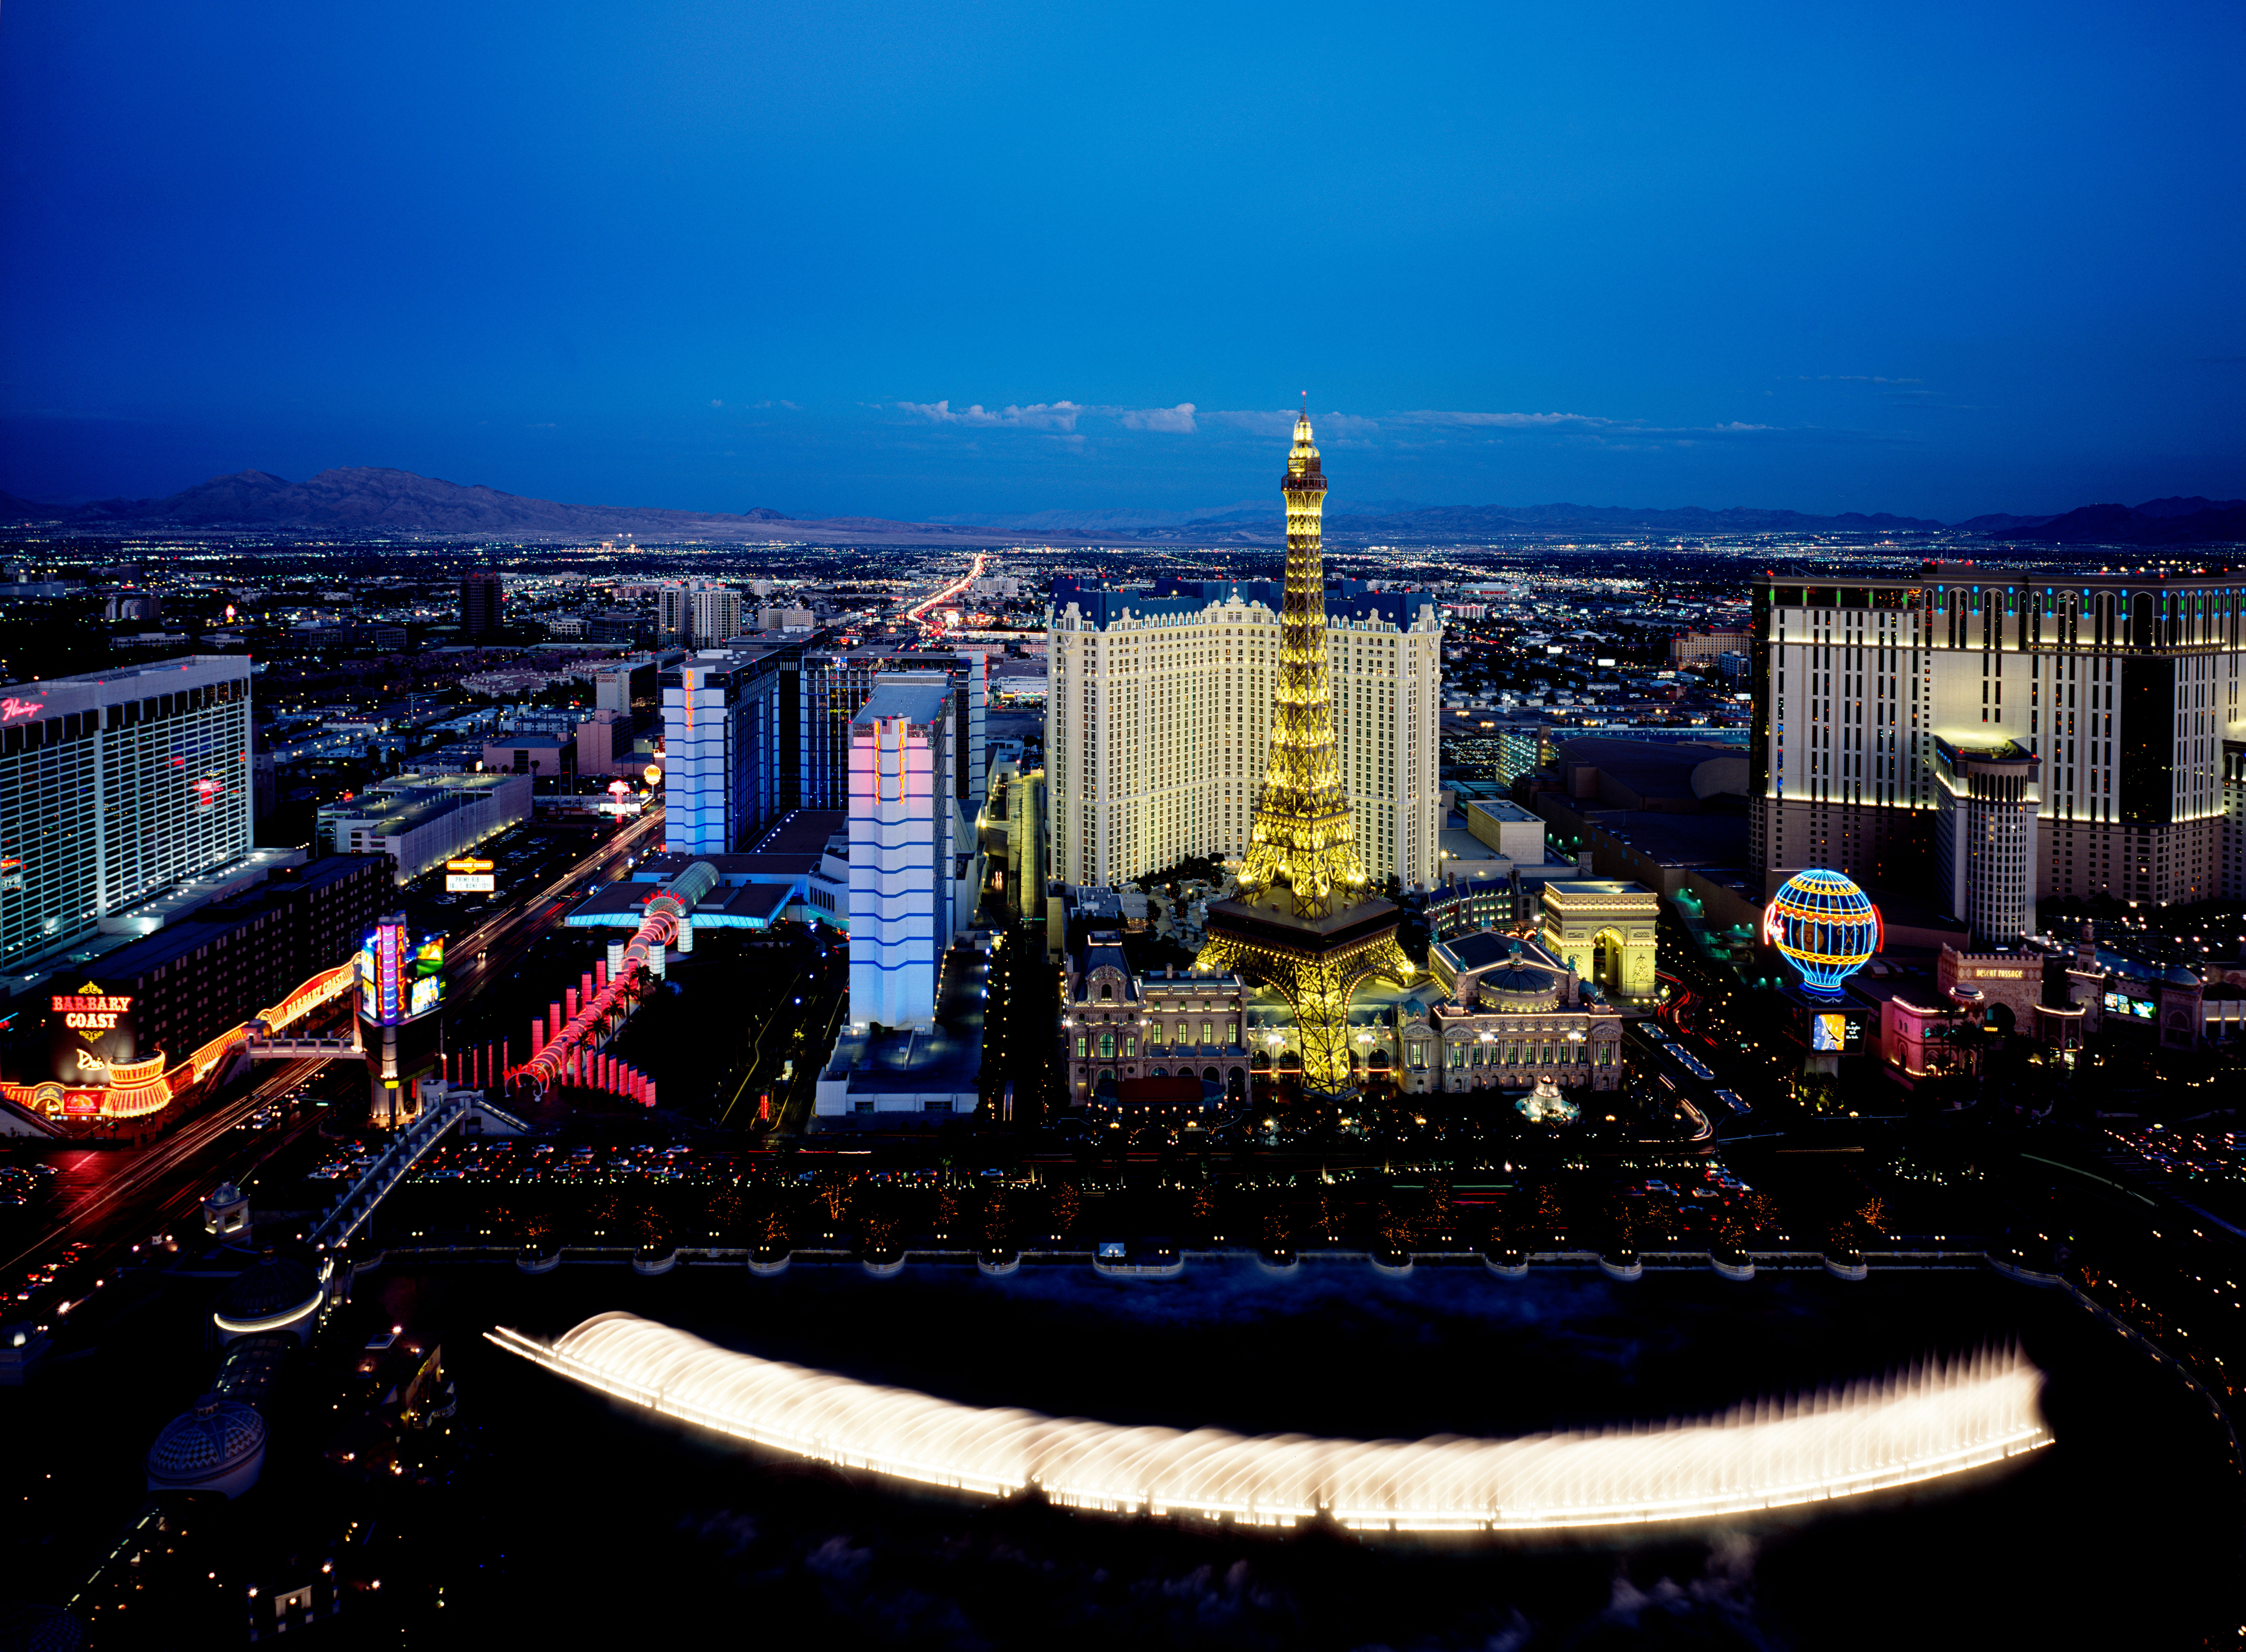 Image of an overhead view of Las Vegas at night 